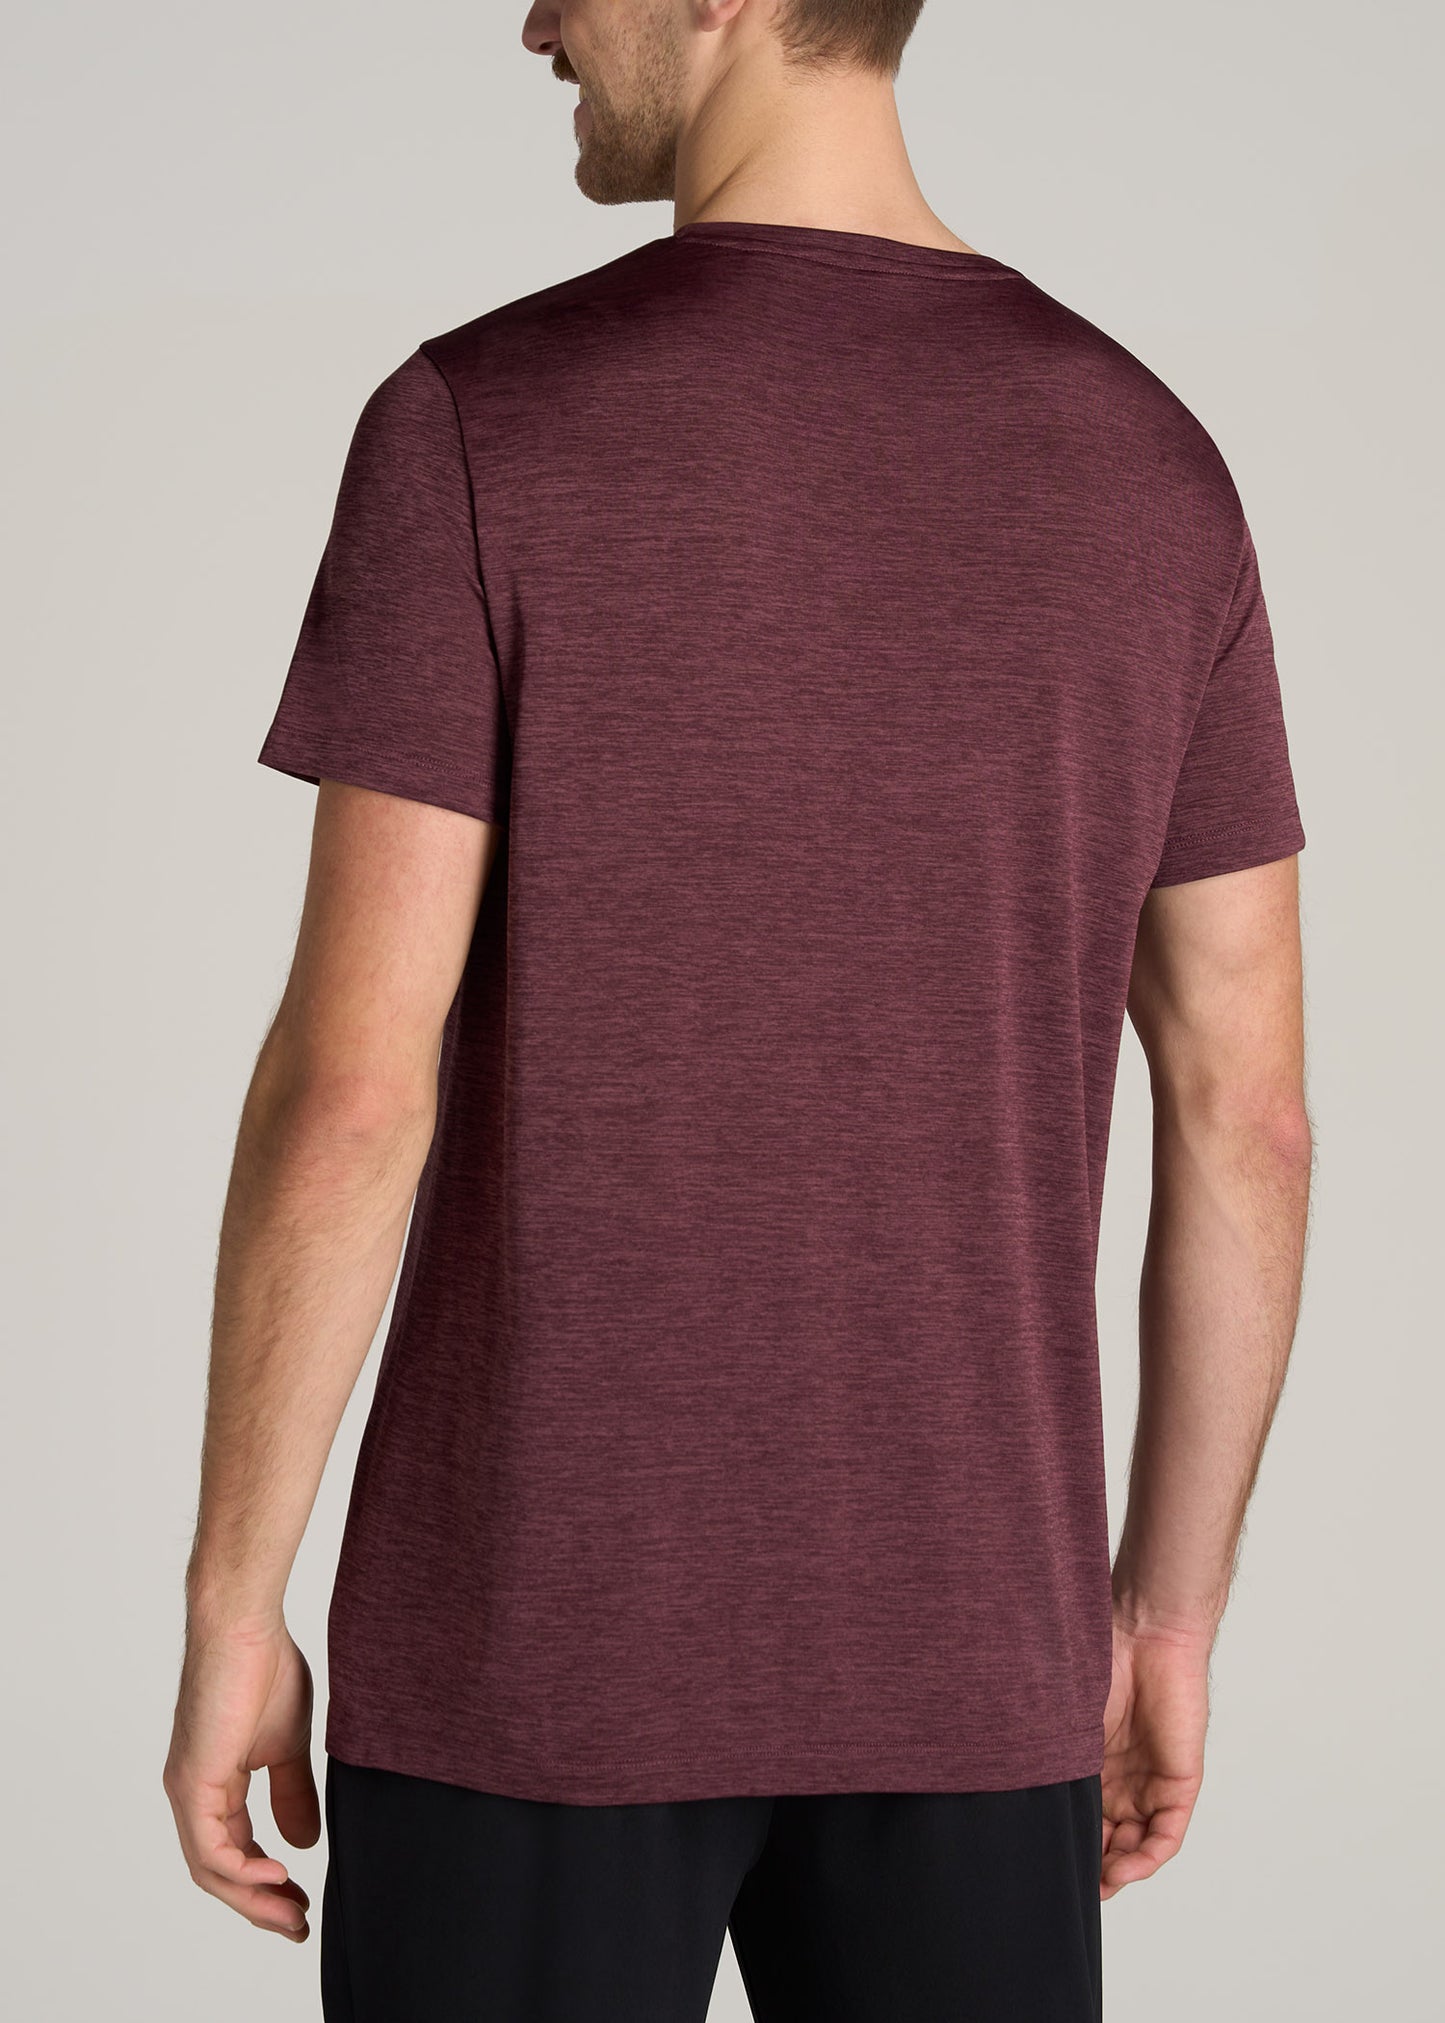 American-Tall-Men-Performance-MODERN-FIT-Athletic-Jersey-Tee-Rust-Red-back